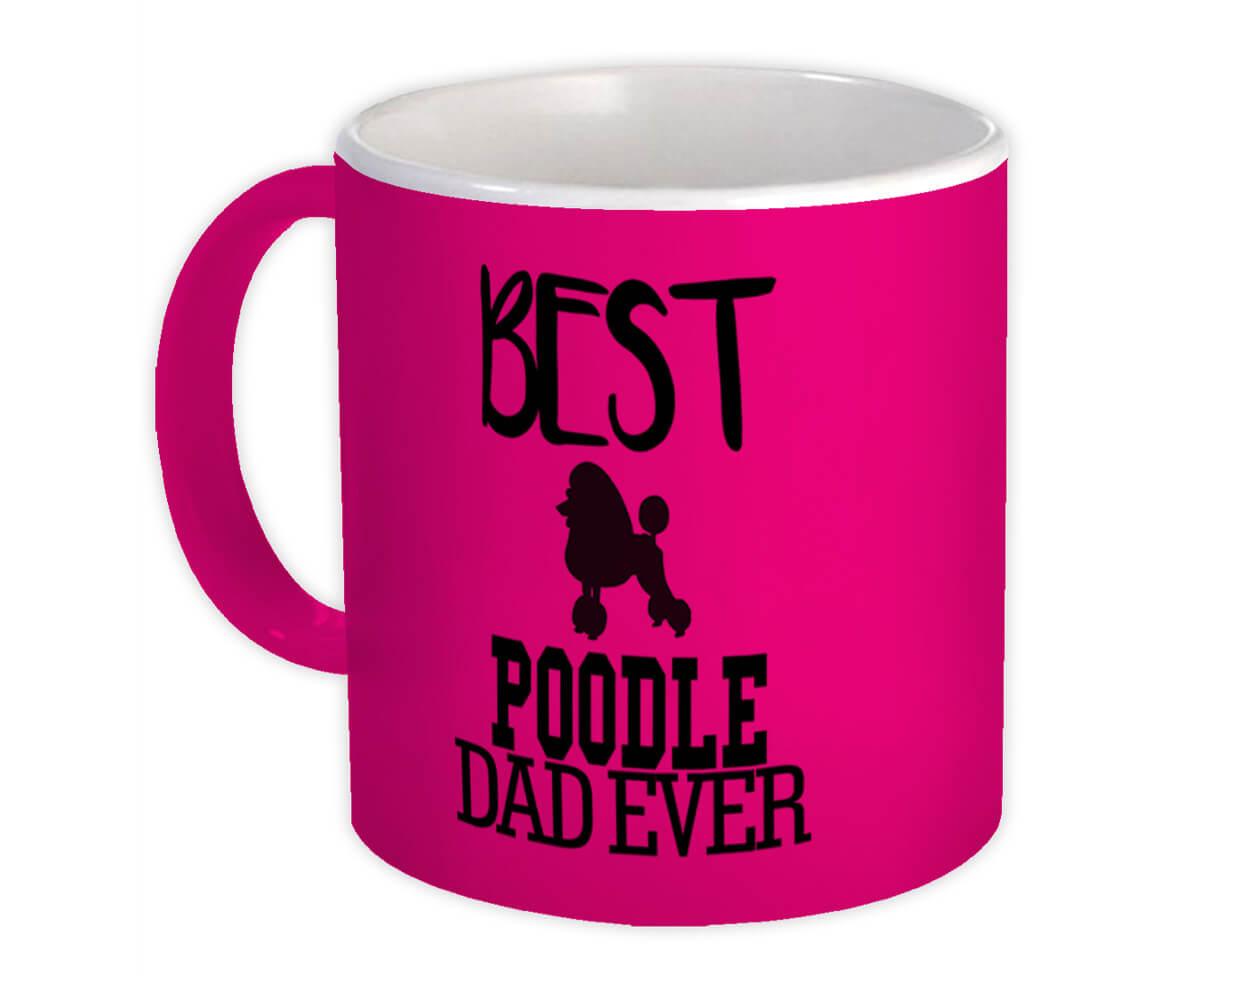 Gift Mug Dog Silhouette Cup Funny Pet Animal Father Poodle DAD 